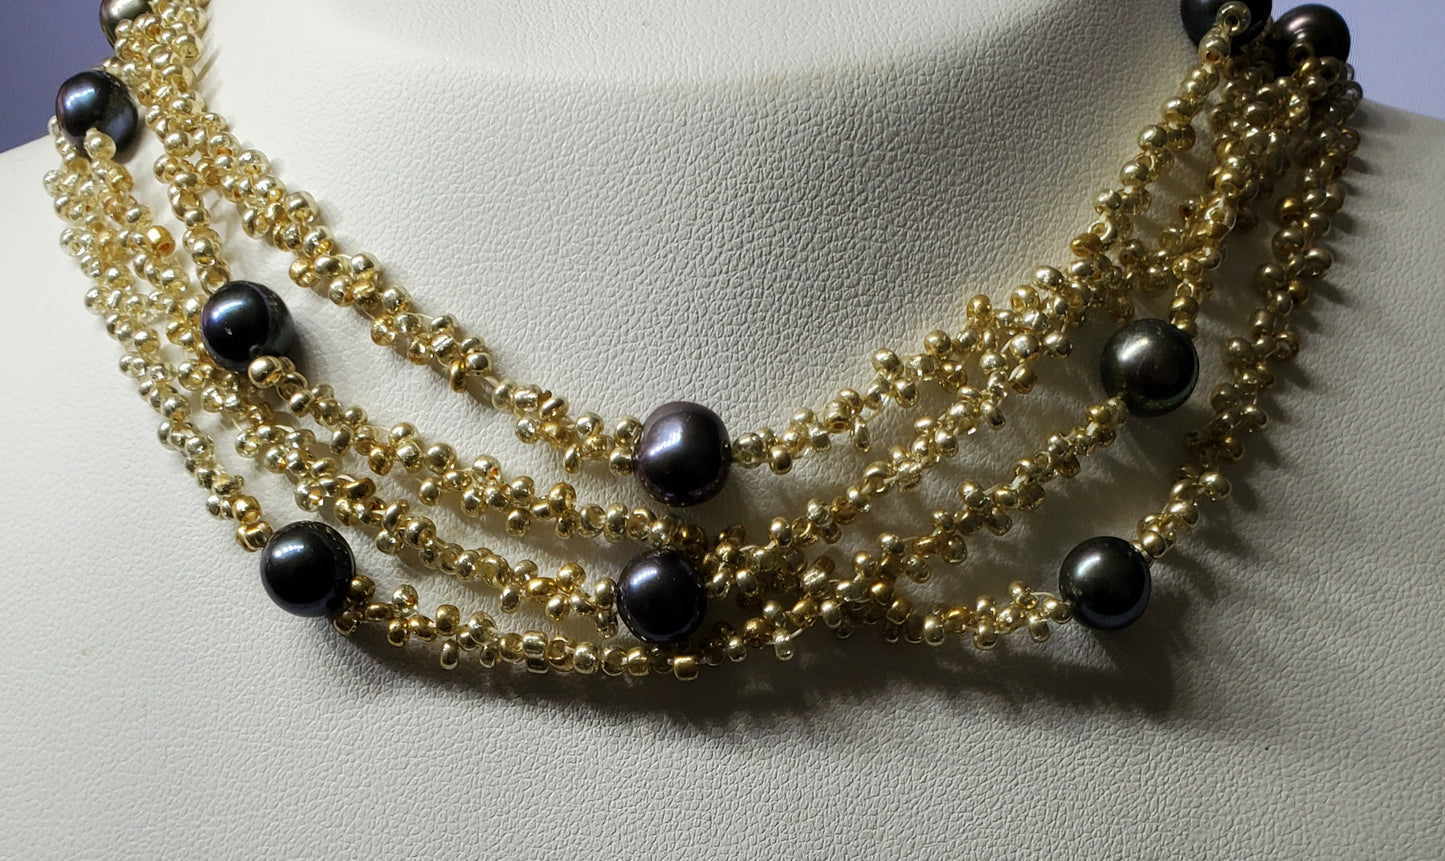 Handmade Gold Beaded Pacific Black Pearl Wrap Around Necklace